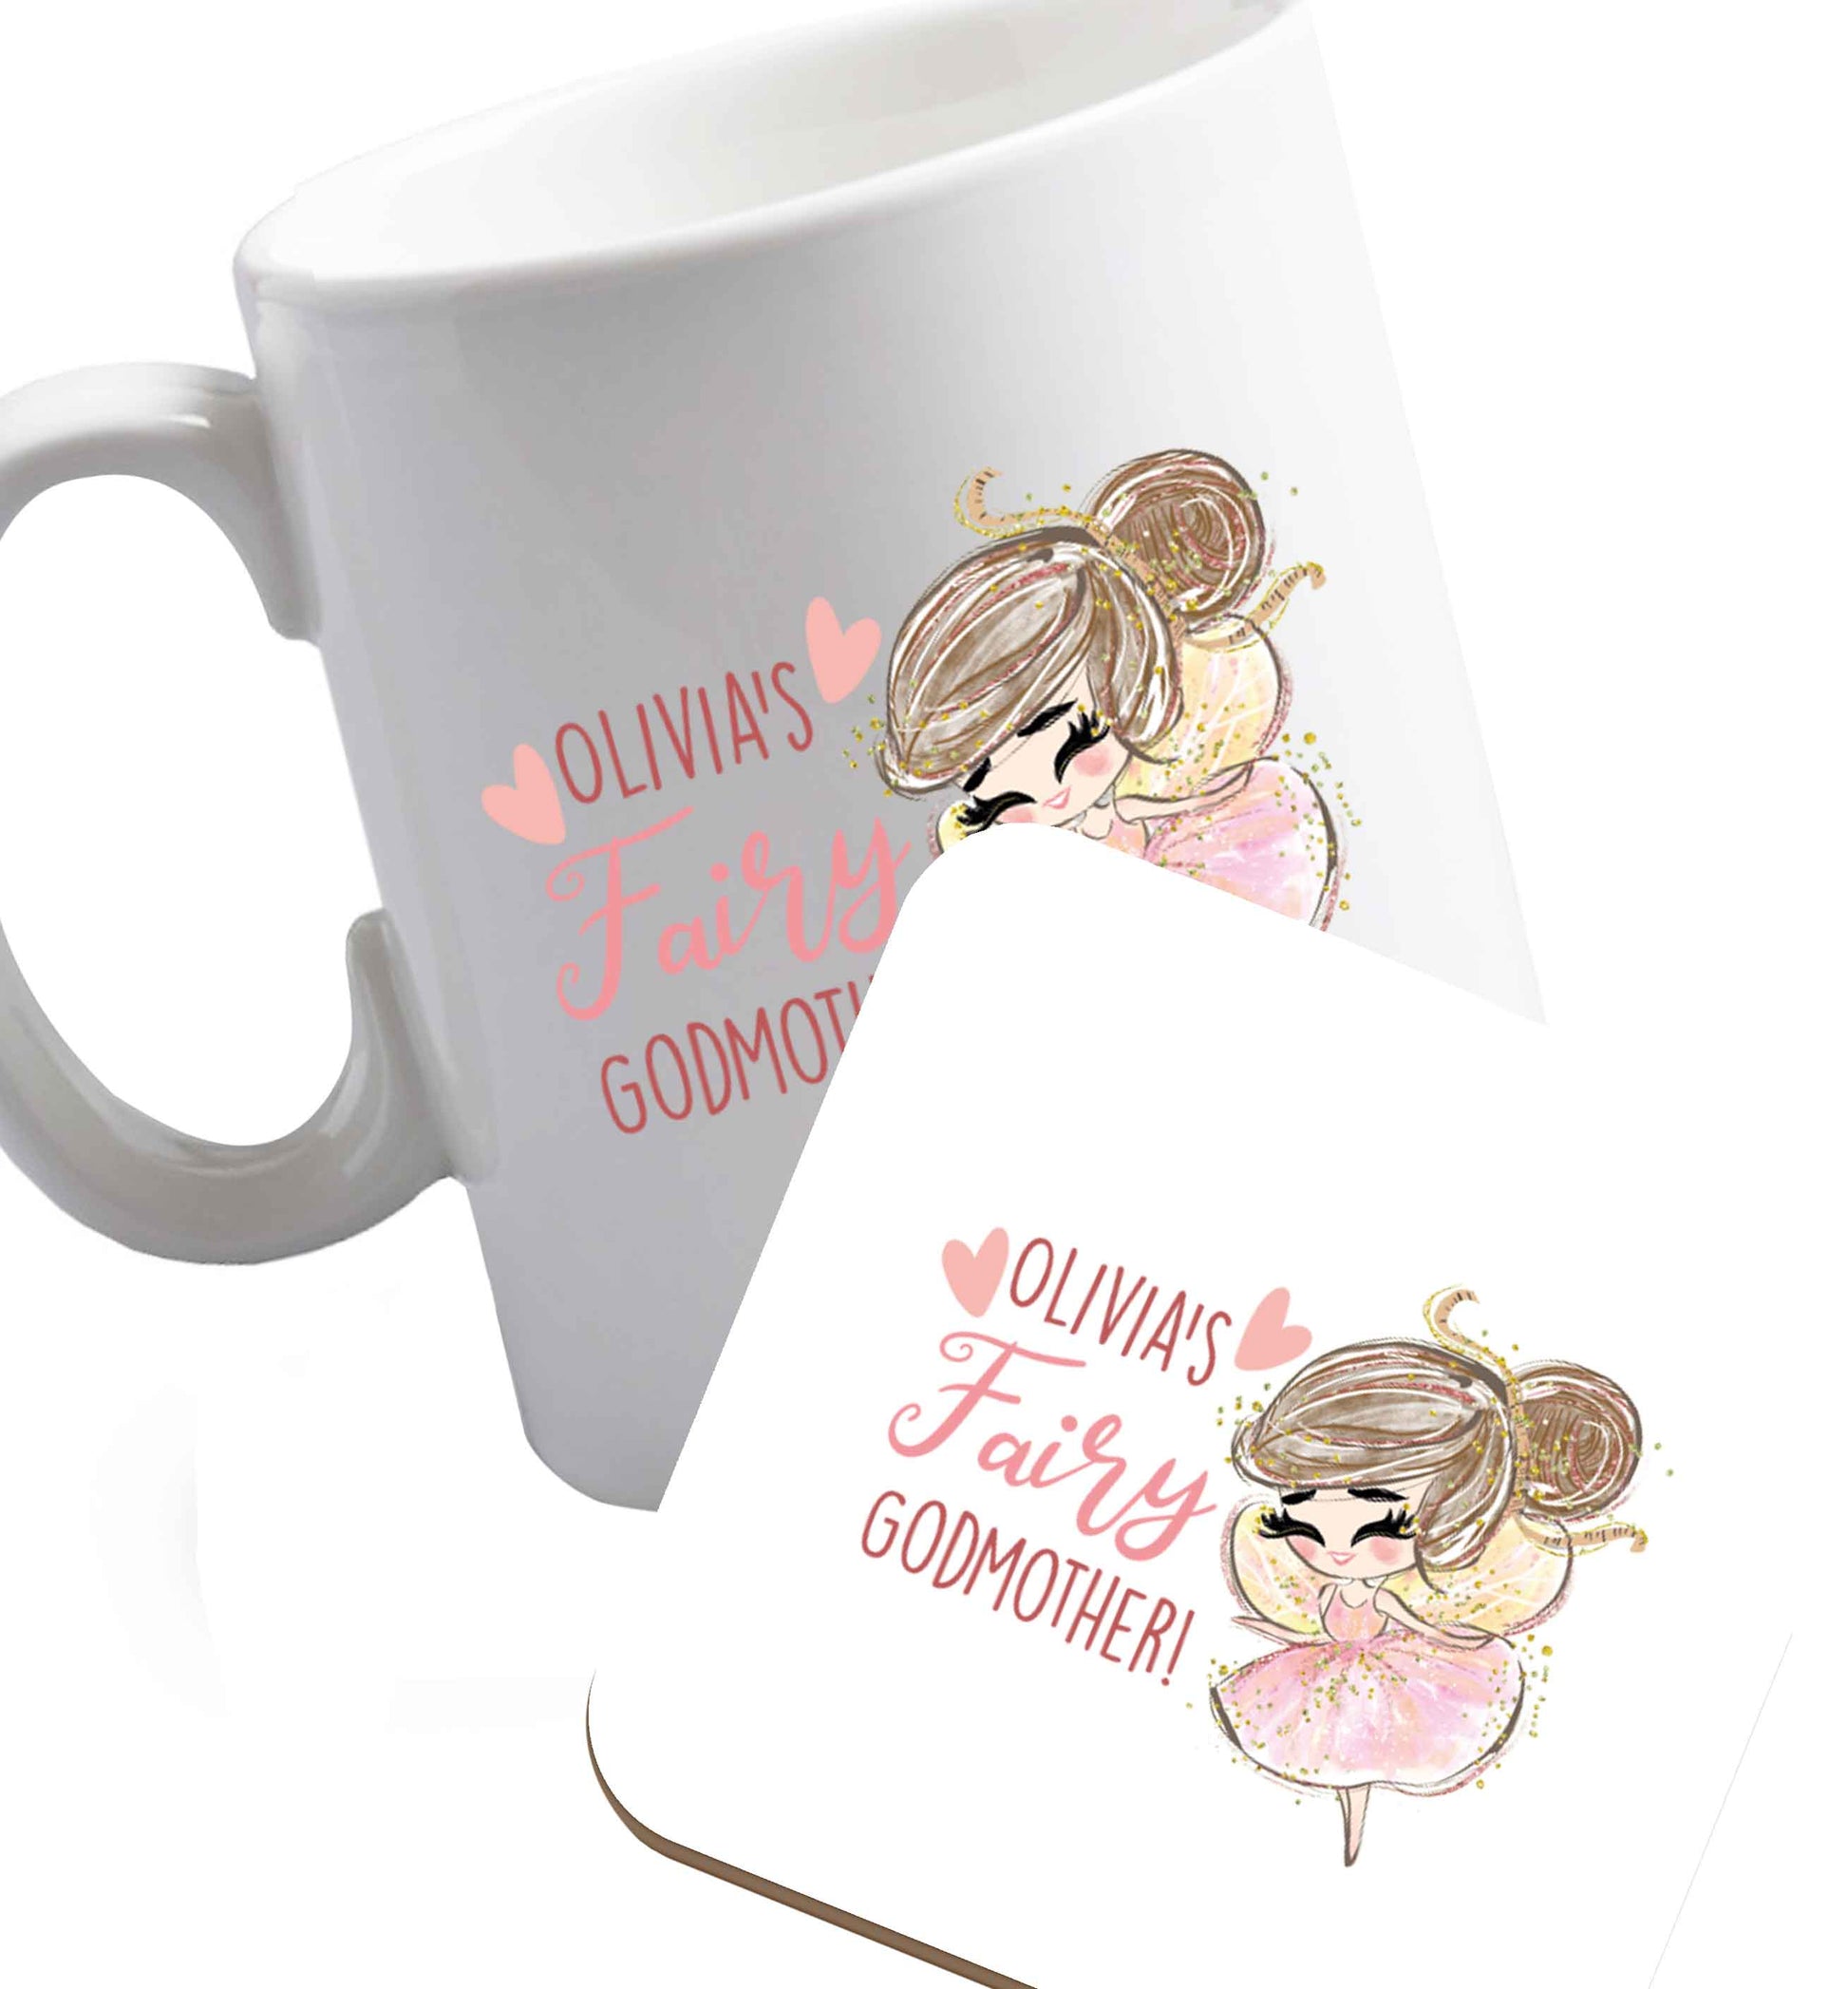 10 oz Personalised fairy Godmother - brown hair  ceramic mug and coaster set right handed